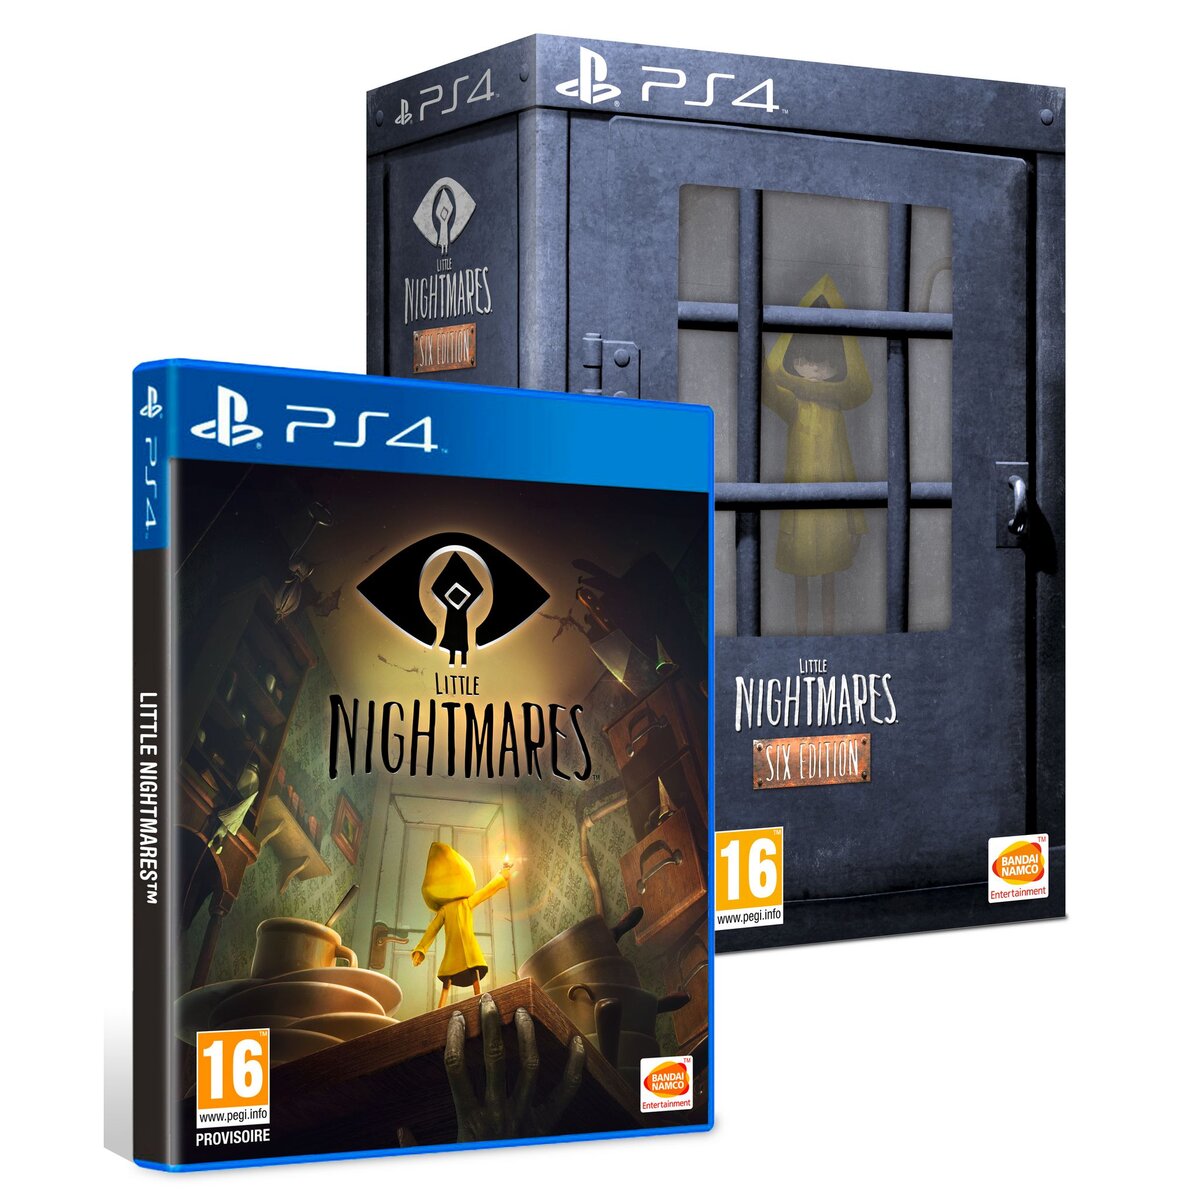 LITTLE NIGHTMARES PS4 - Six édition